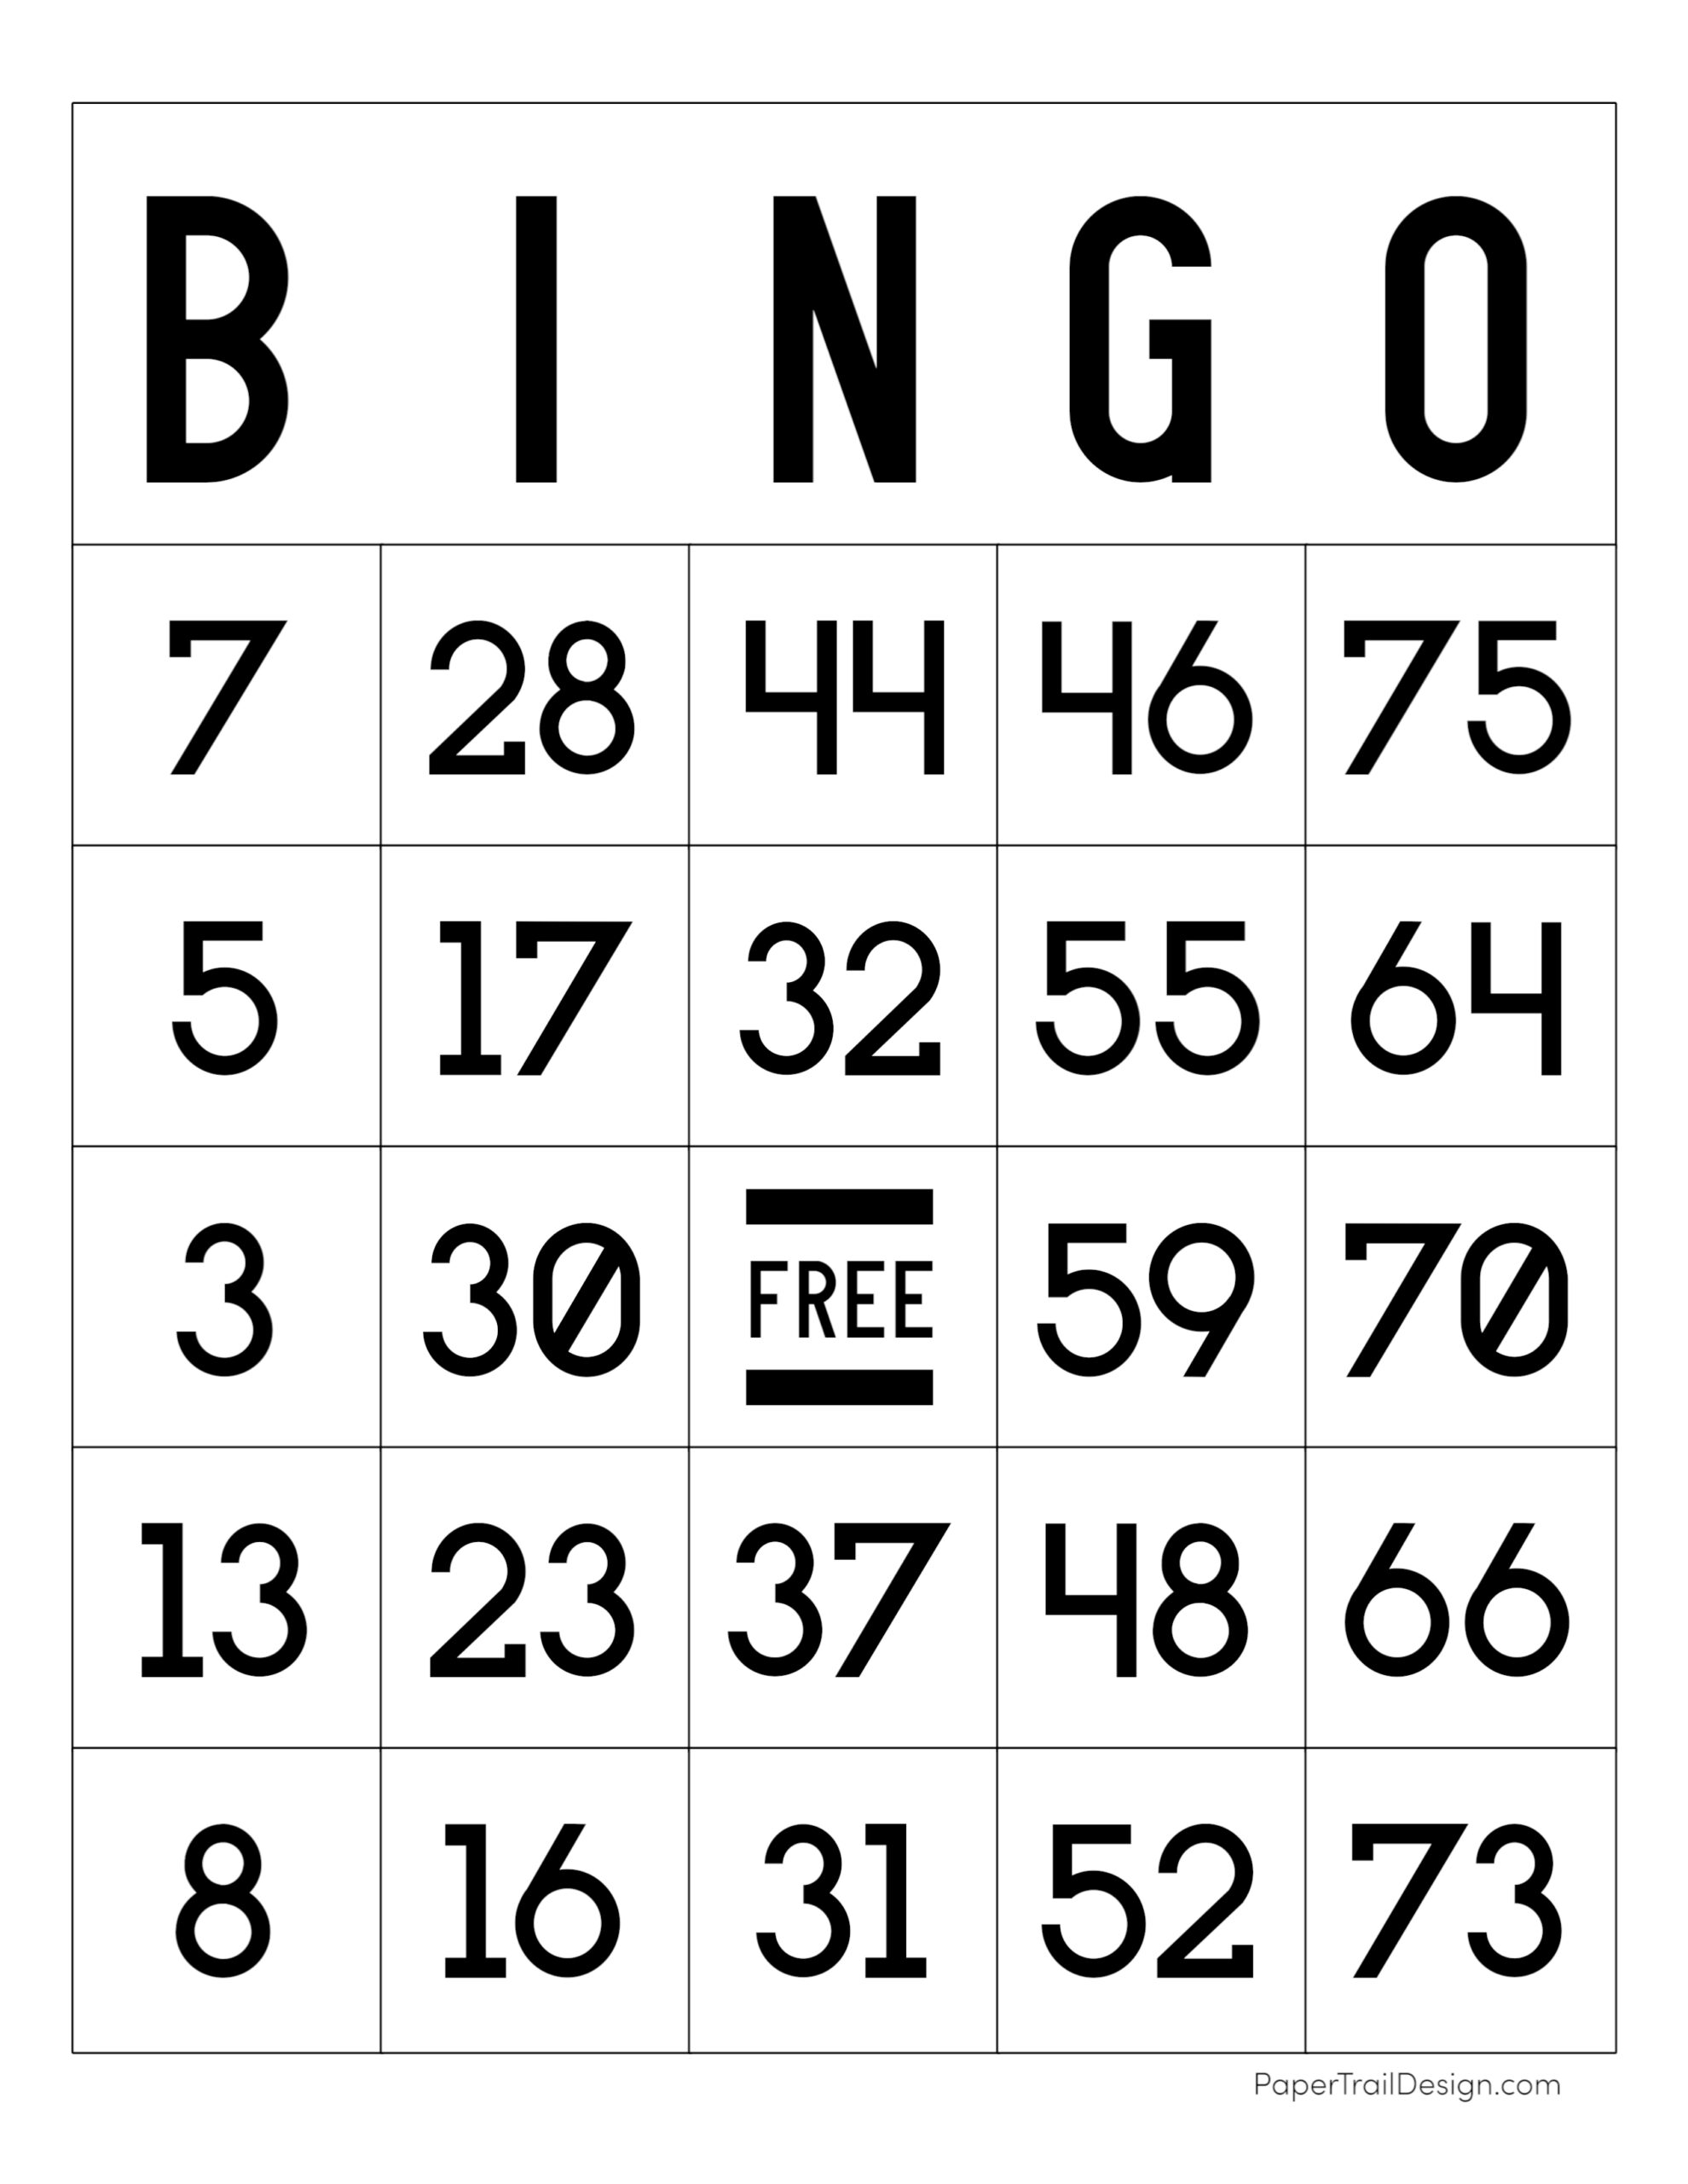 Free Printable Bingo Cards With Numbers